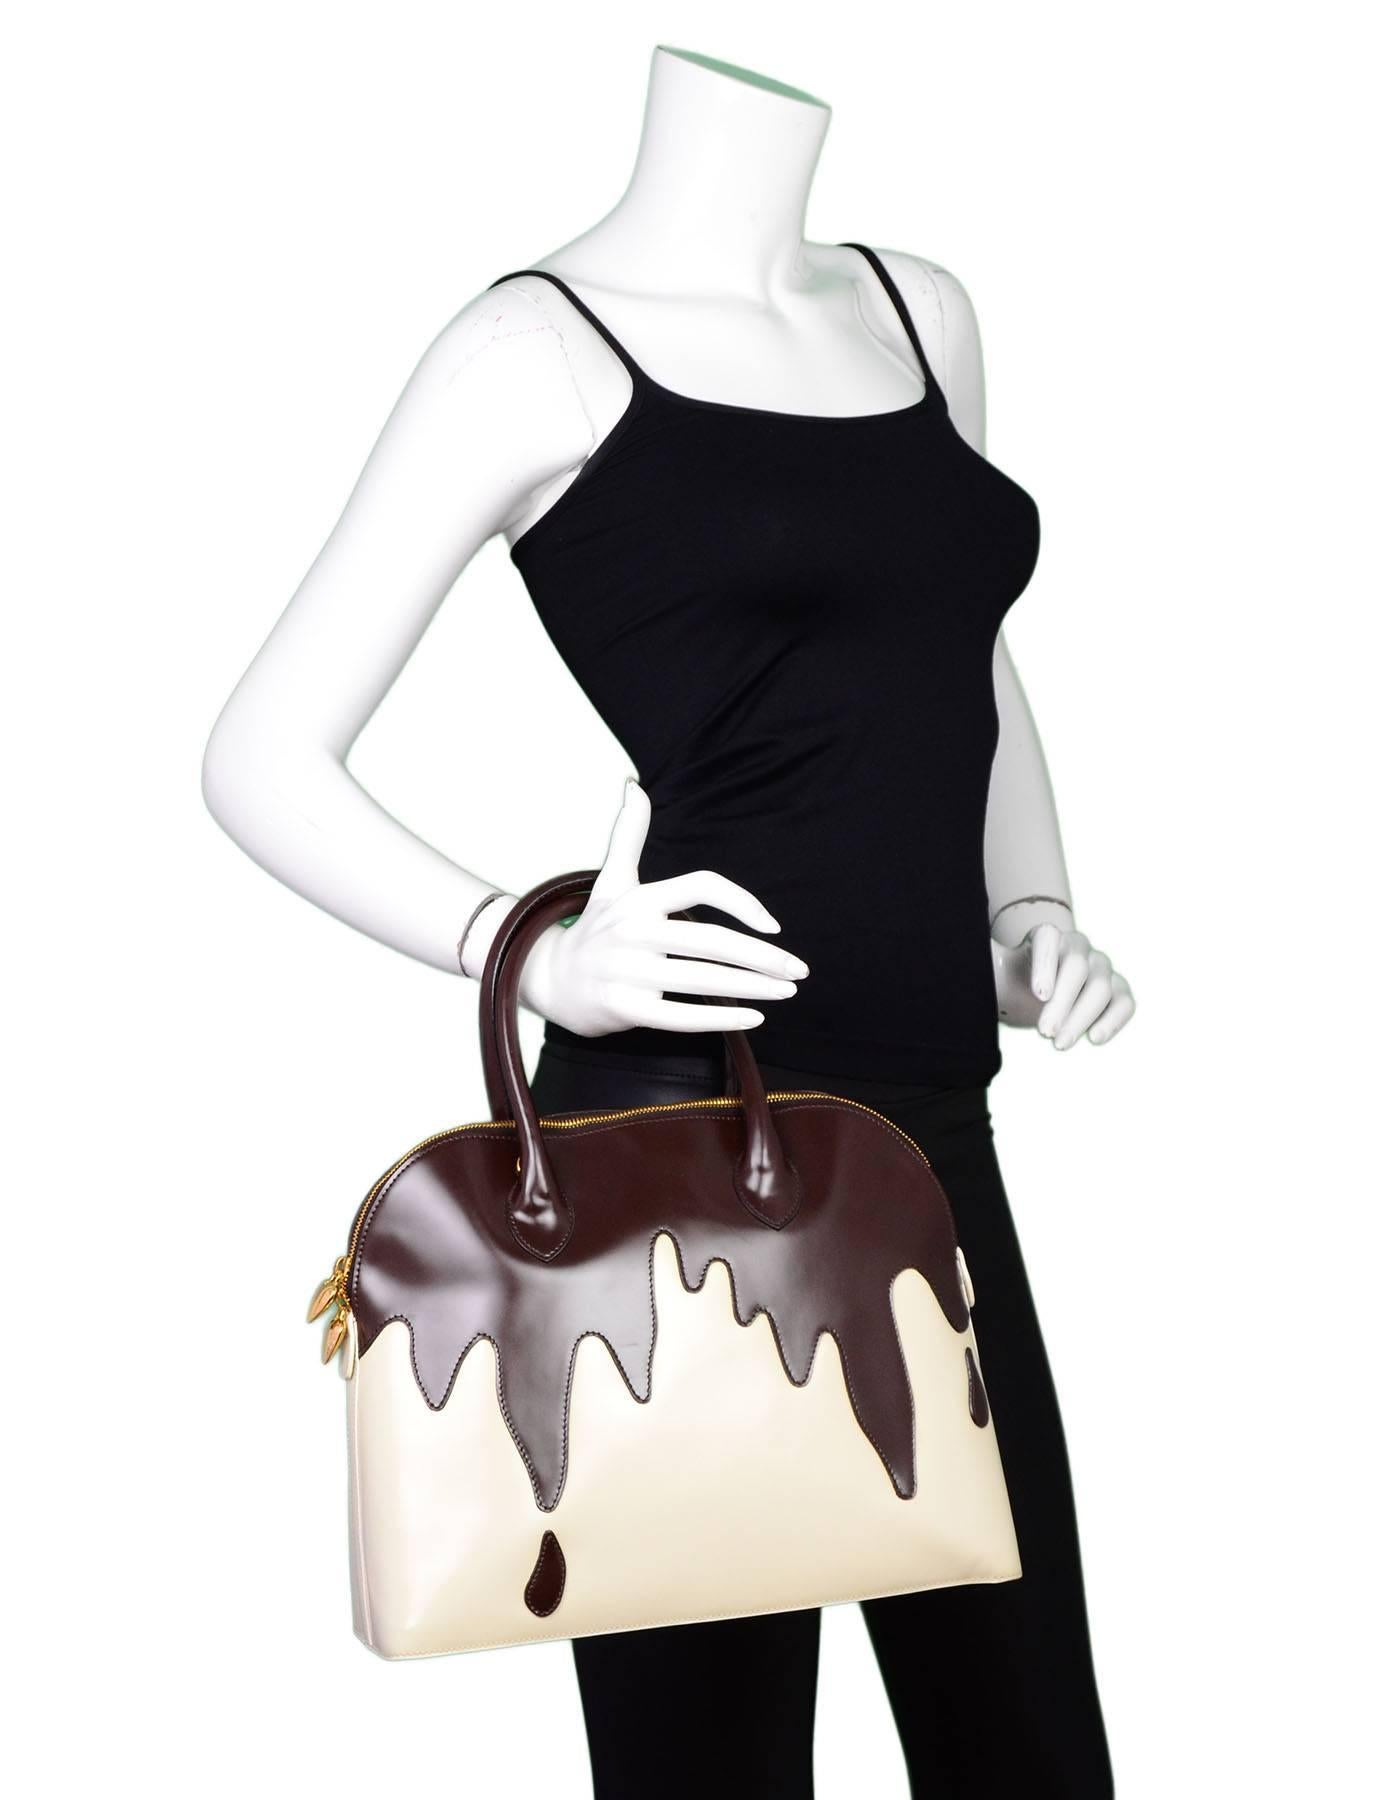 Moschino Dripping Chocolate Handle Bag 

Made In: Italy
Color: Brown, ivory
Interior Lining: Ivory textile
Hardware: Goldtone
Materials: Glazed leather, metal
Closure/Opening: Double zip top
Exterior Pockets: None
Interior Pockets: One zip